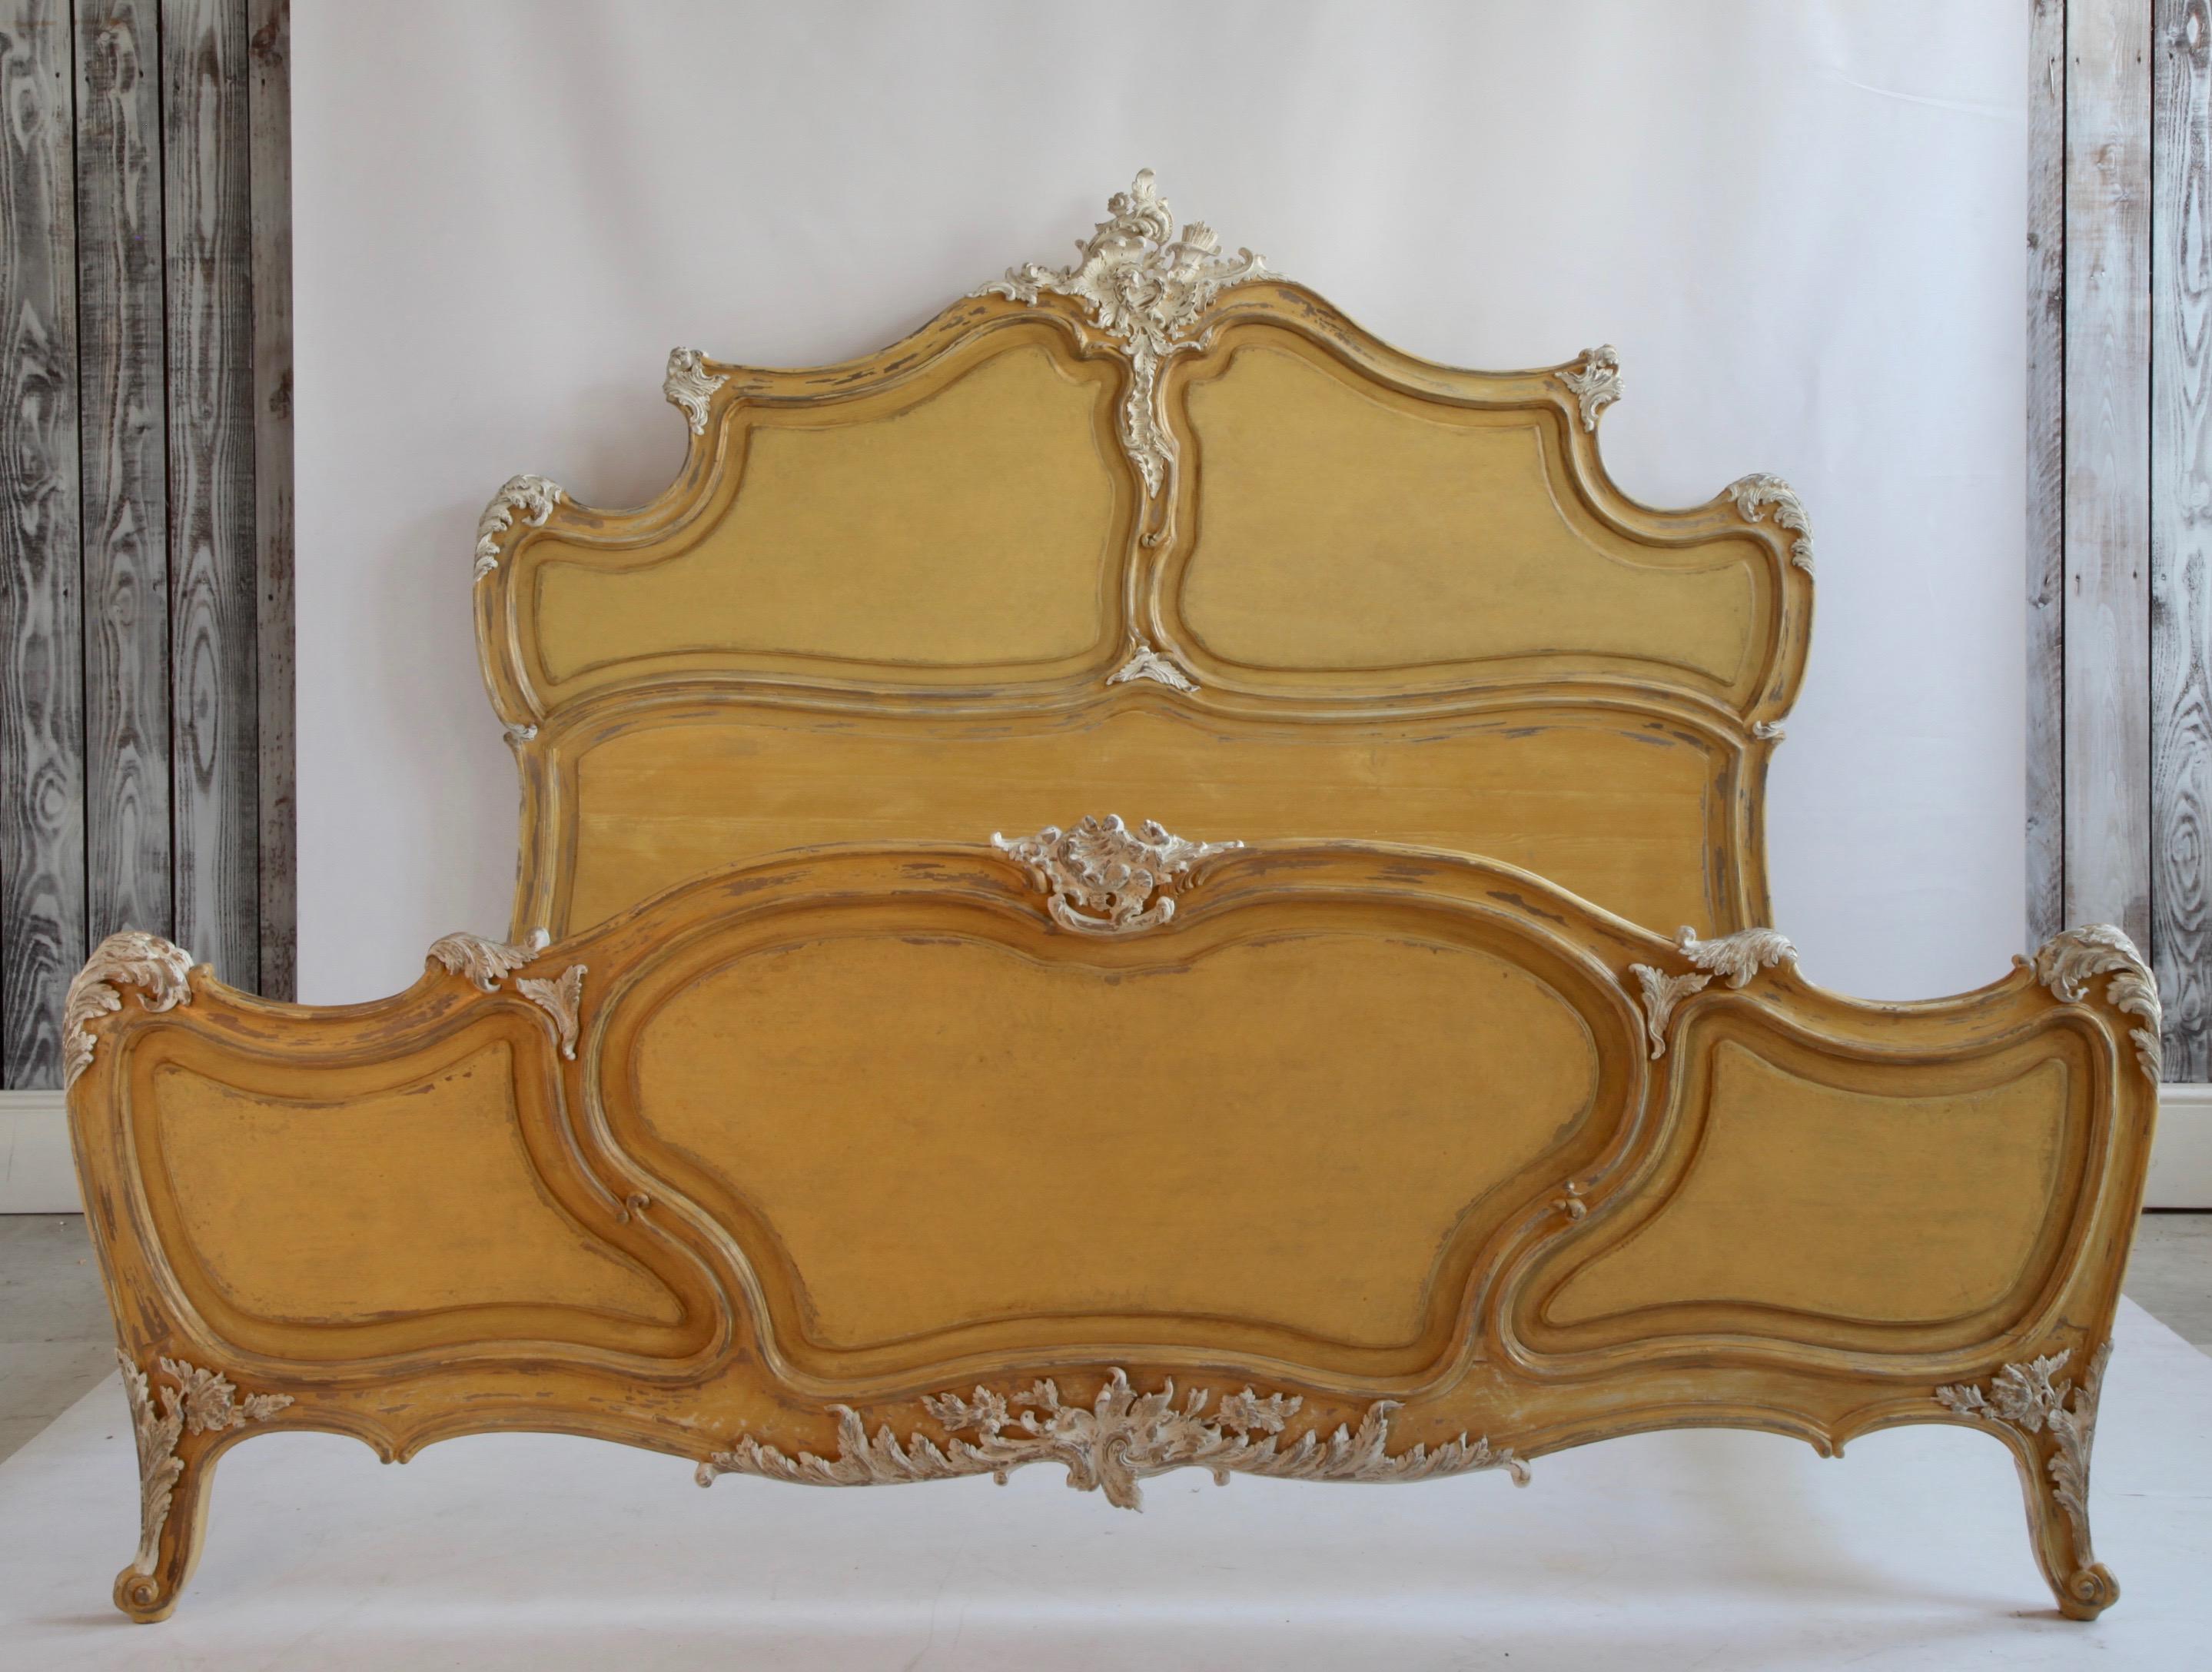 Louis XV Style Painted Bed In Excellent Condition For Sale In London, Park Royal